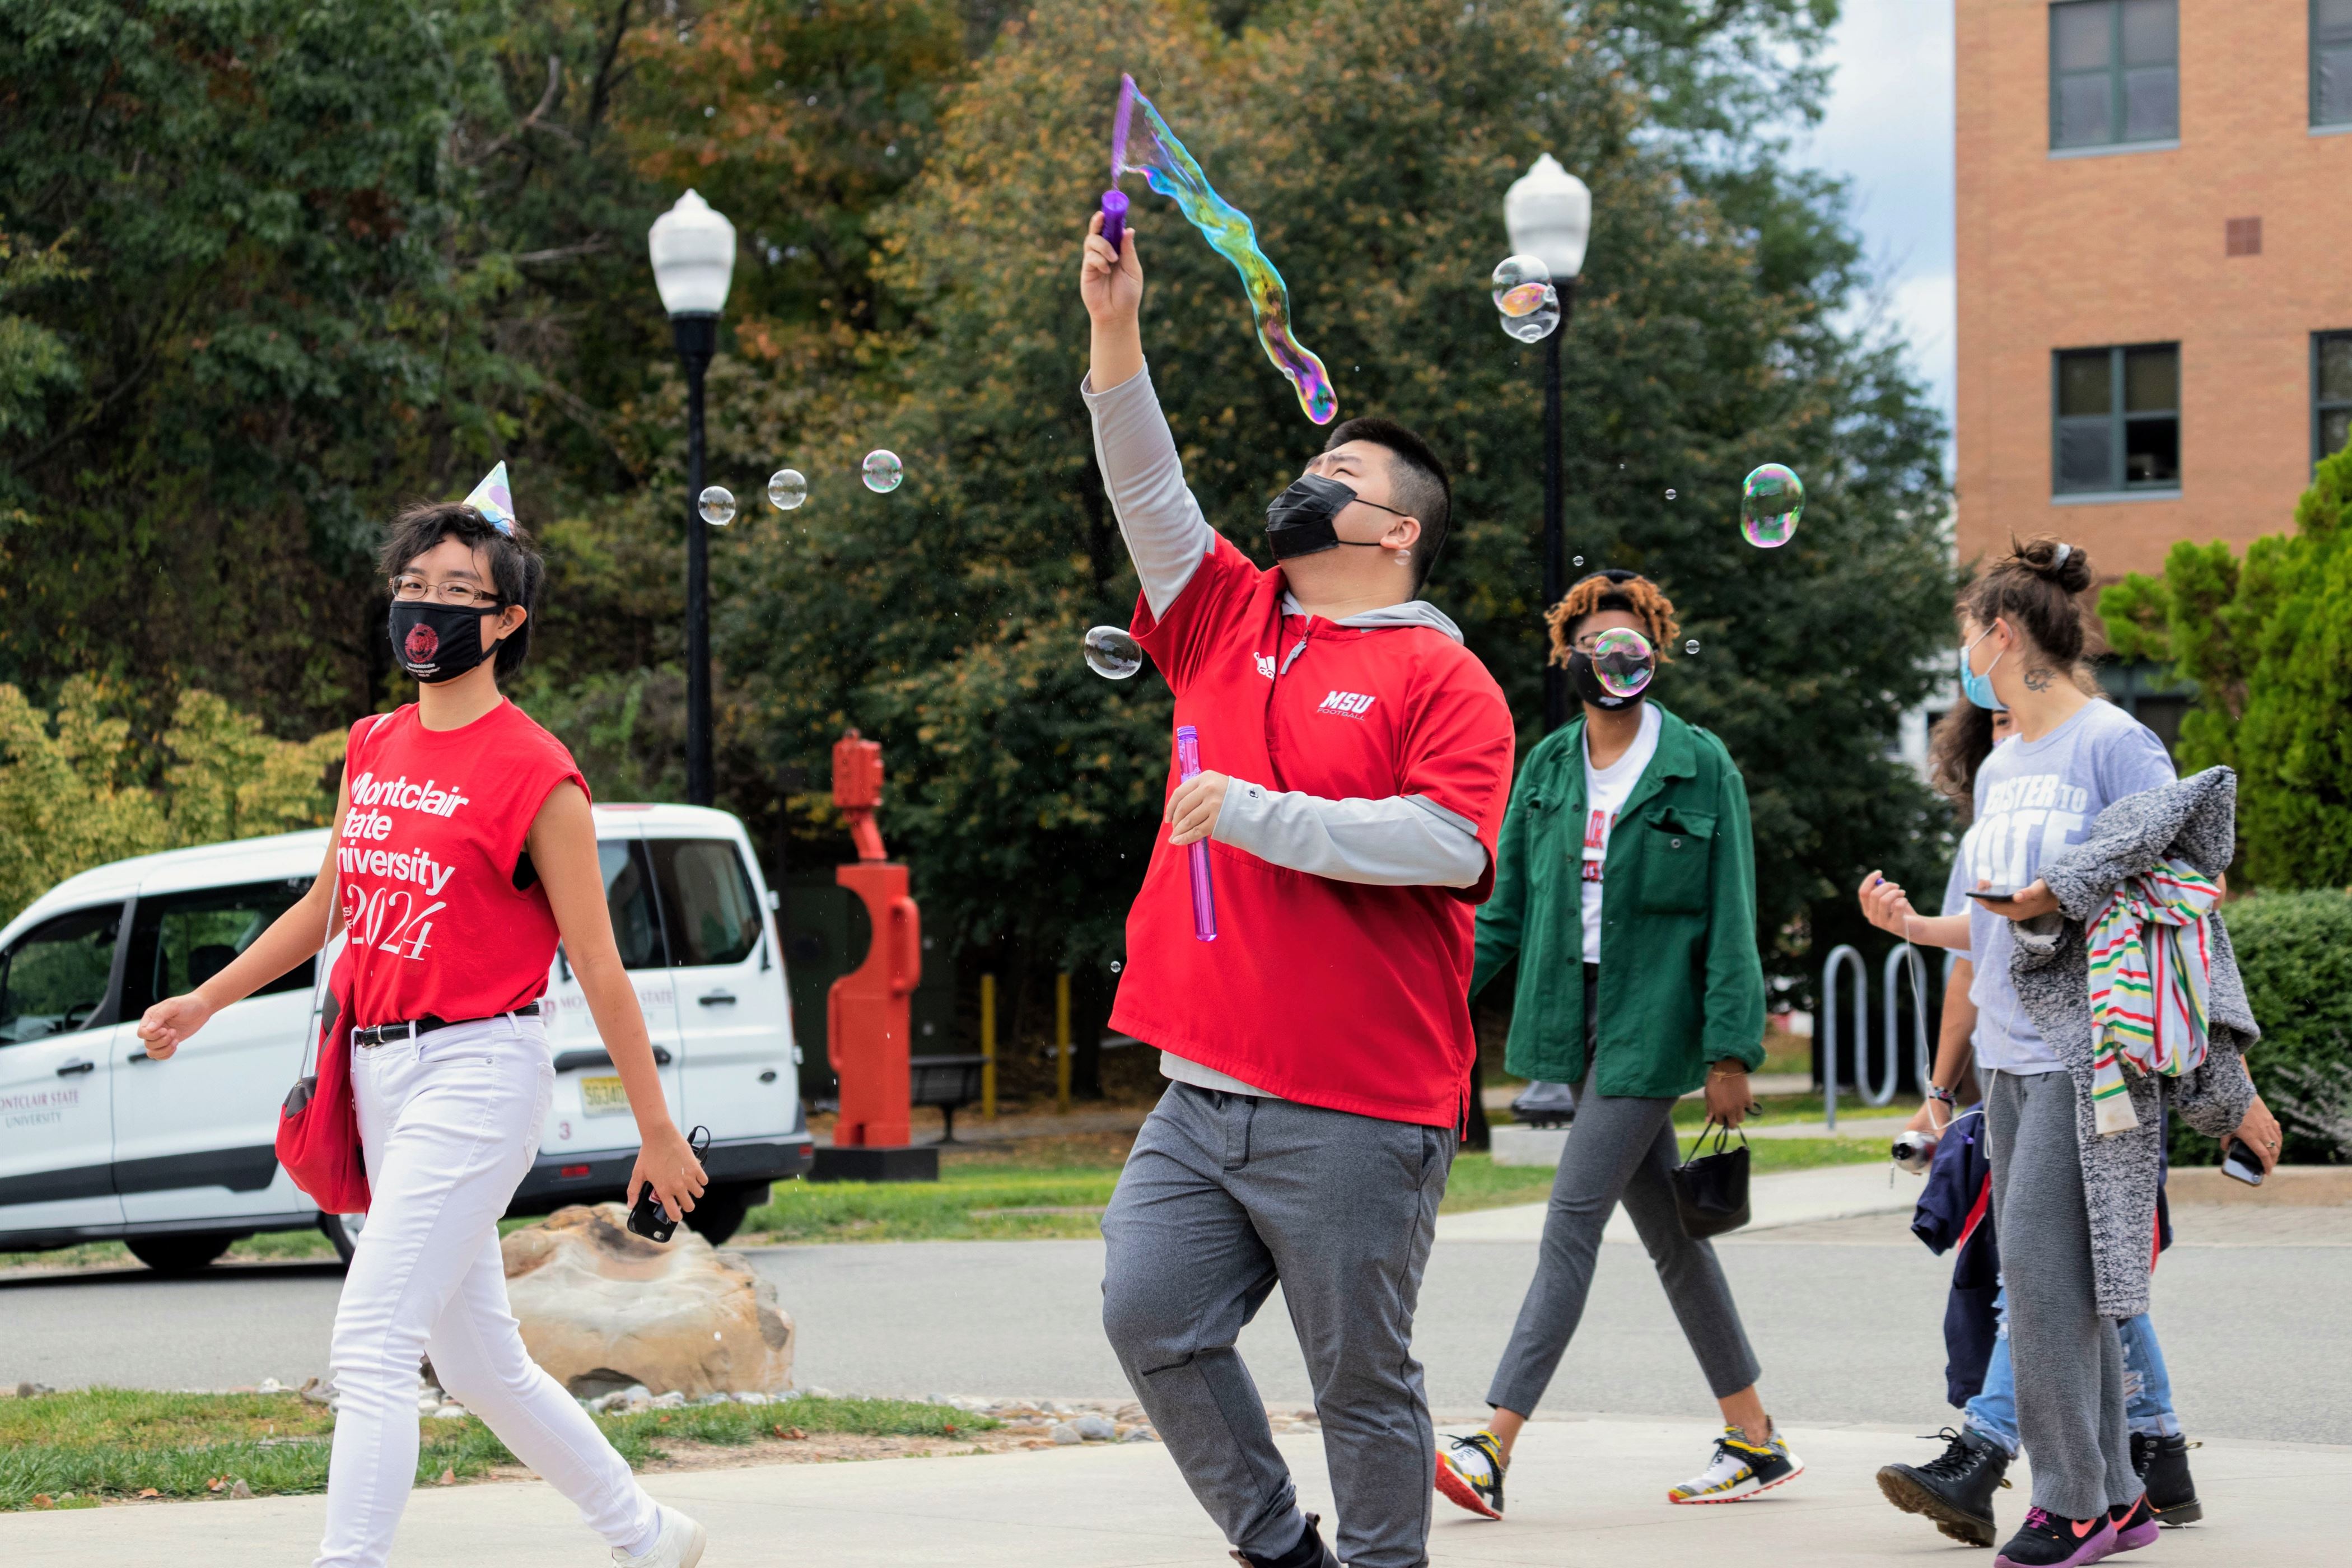 A Montclair State student wafts a bubble wand through the air to create bubbles during Rocky's birthday parade, near Dickson Hall. Sunah Choudhry | The Montclarion